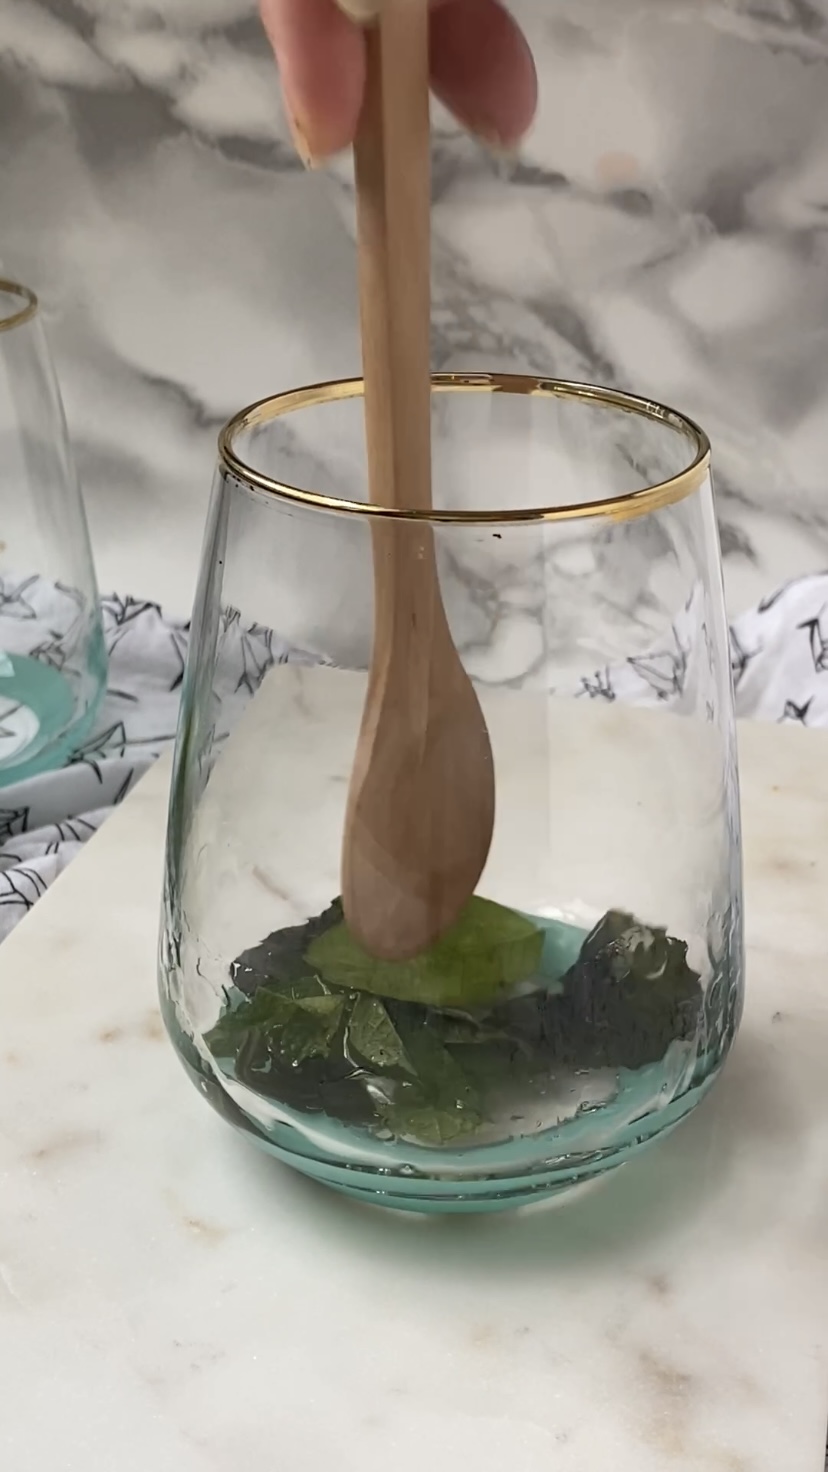 Muddling leaves and simple syrup with a wooden spoon.